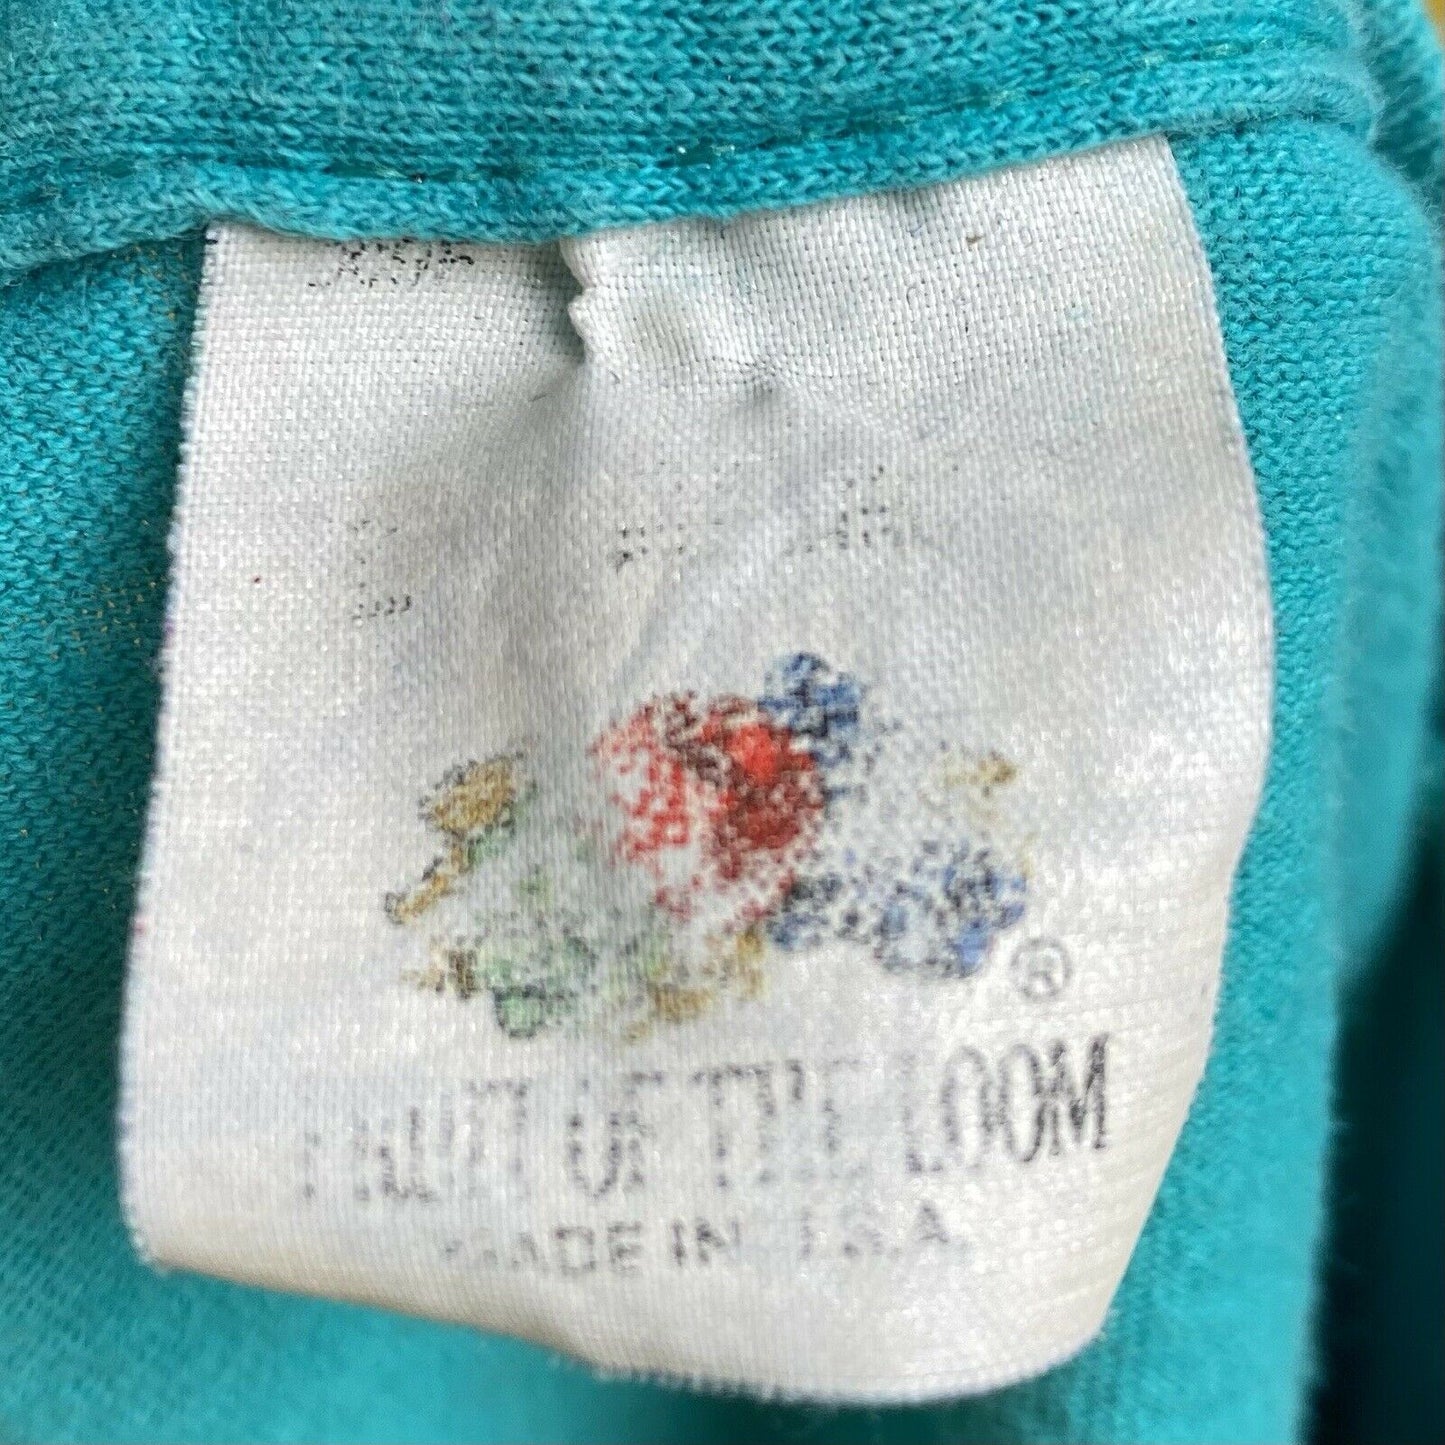 1980s Teal Pocket T-Shirt, Fruit of the Loom Size Medium, Distressed 80s Tee, Single Stitch Blank